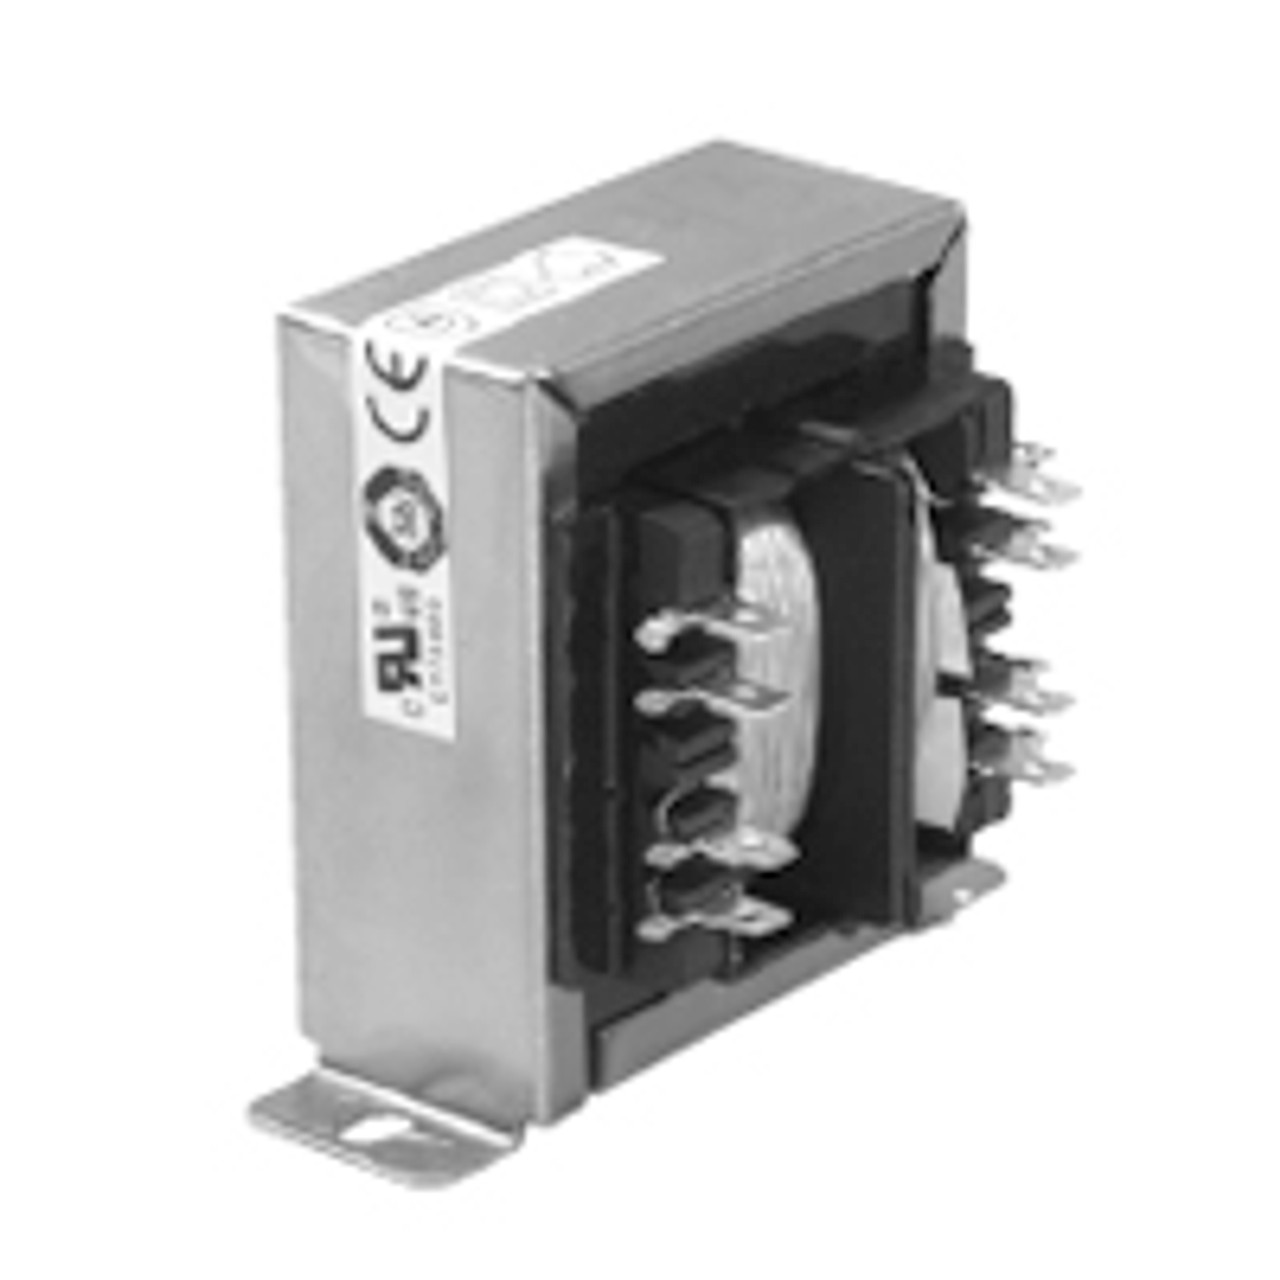 Stancor / White Rodgers DSWC-410 Chassis Mount Power Transformers